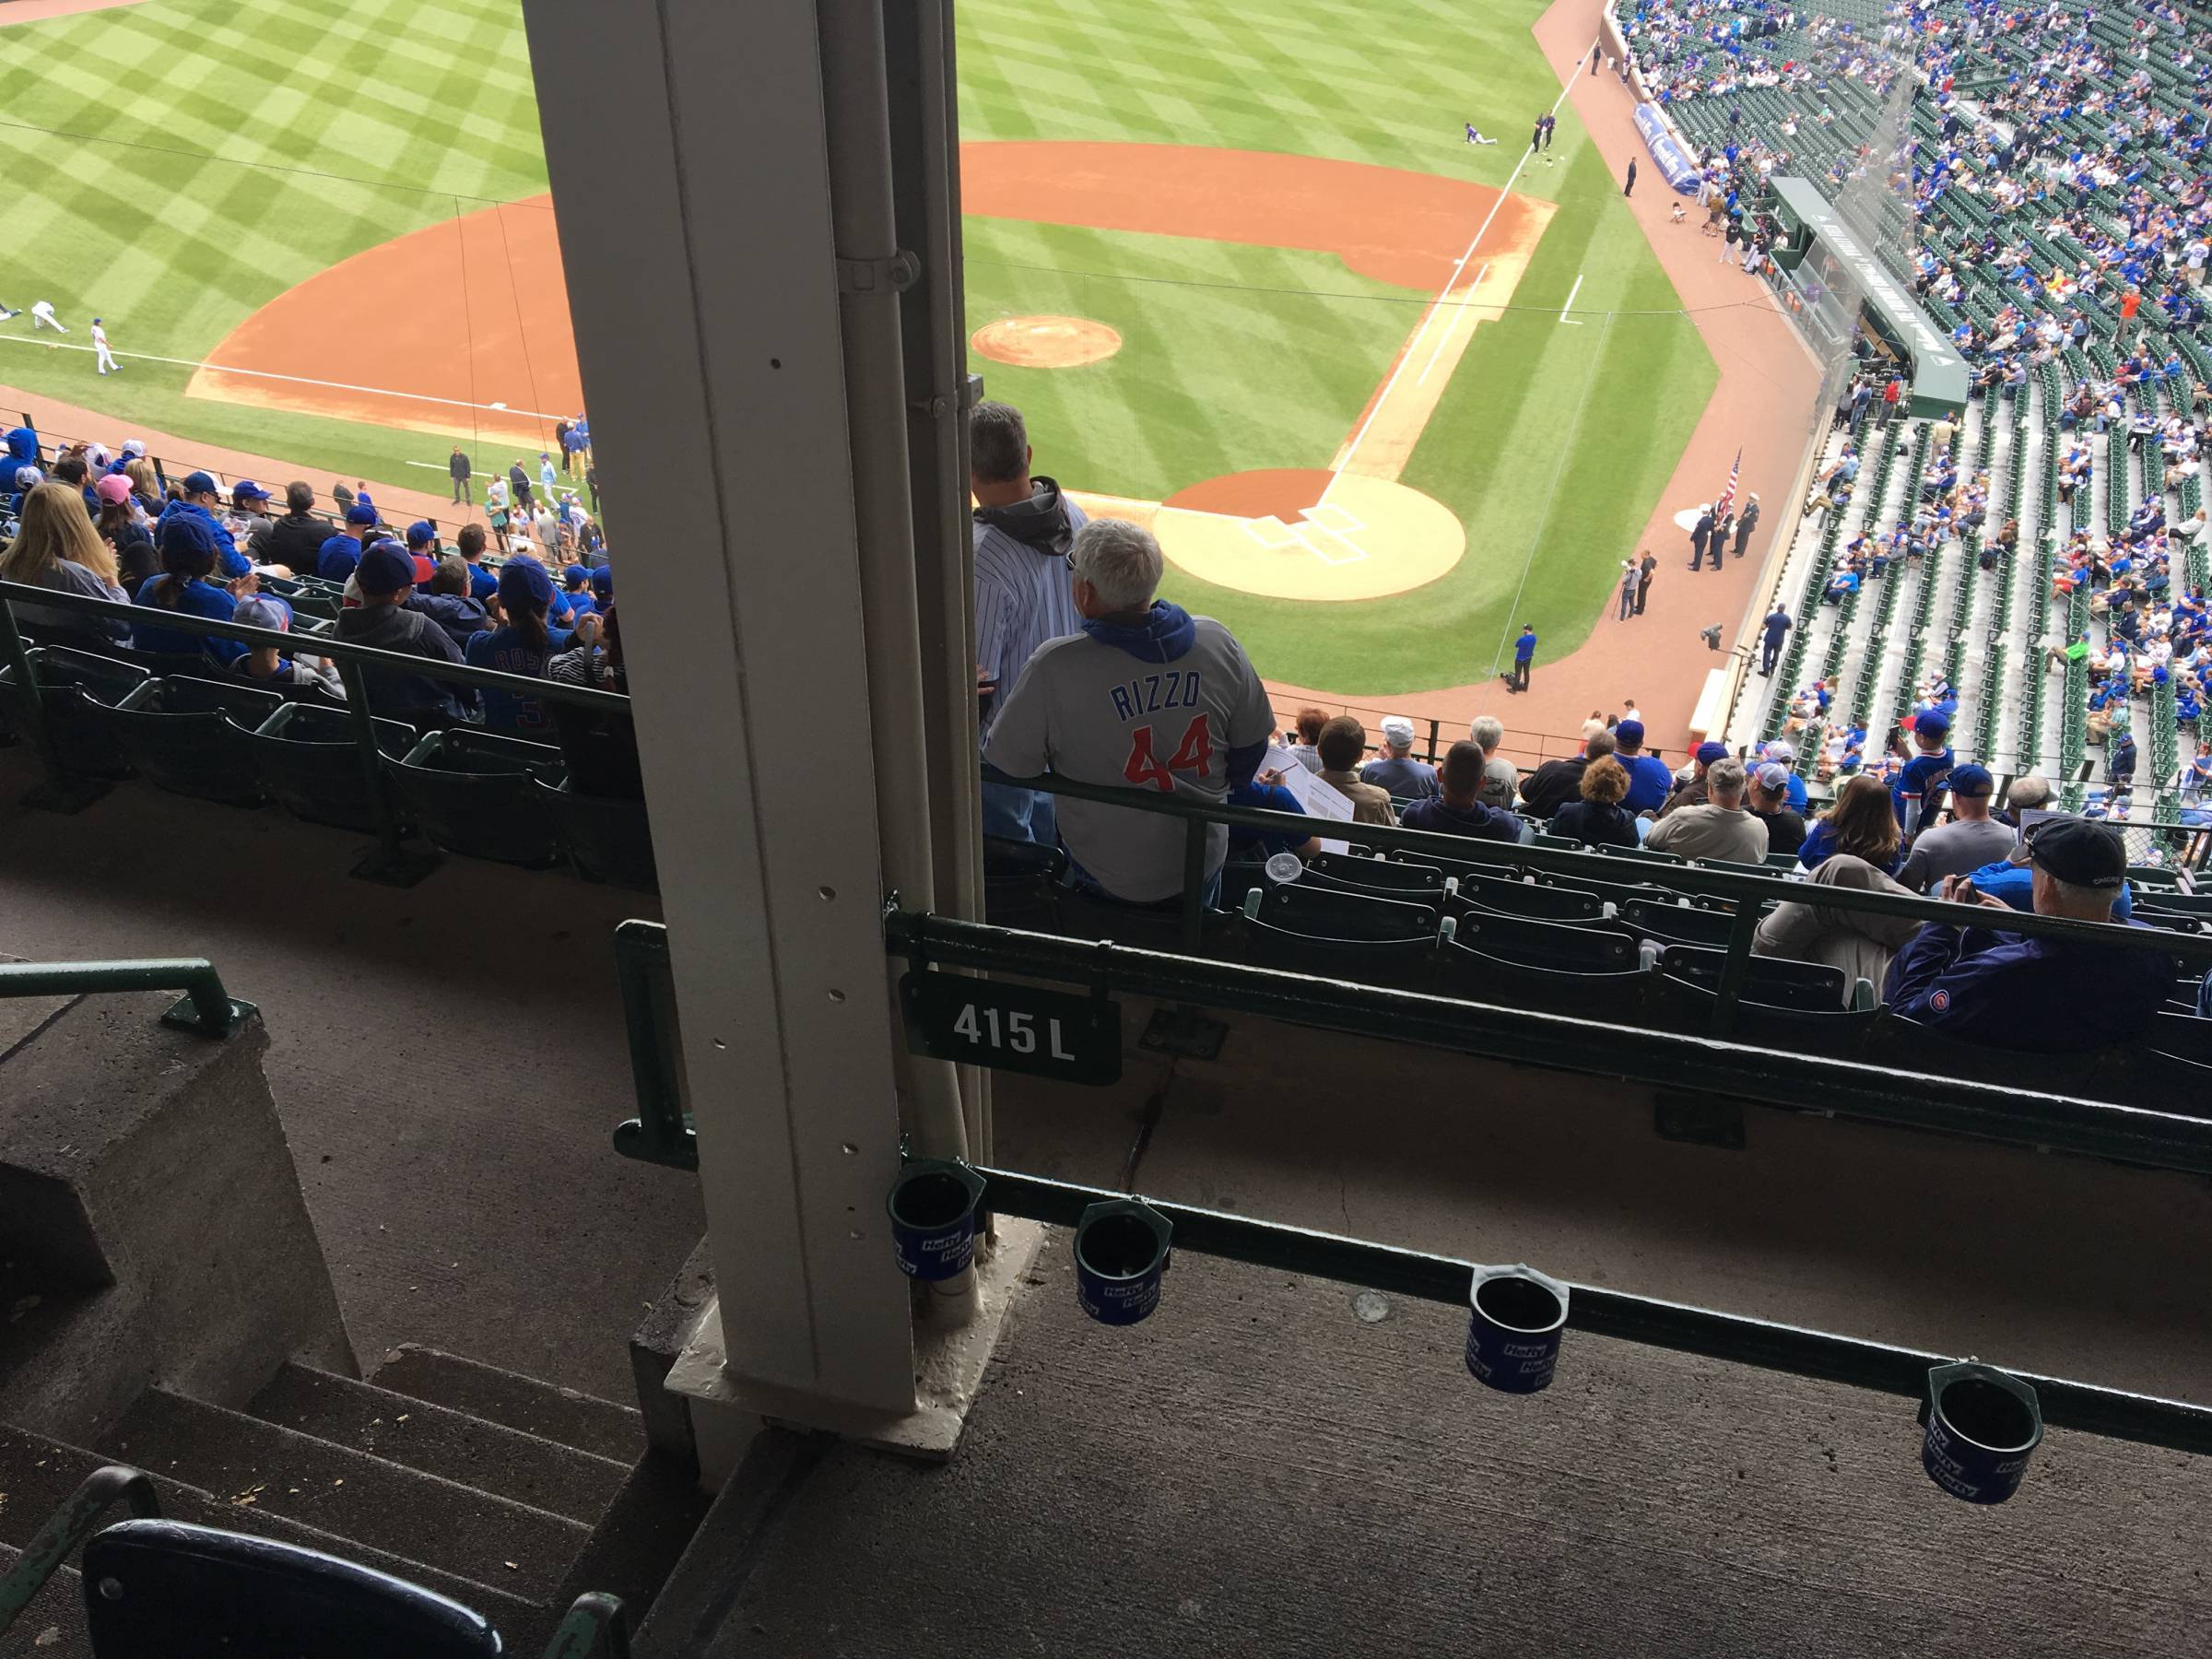 Pole in Section 415L at Wrigley Field